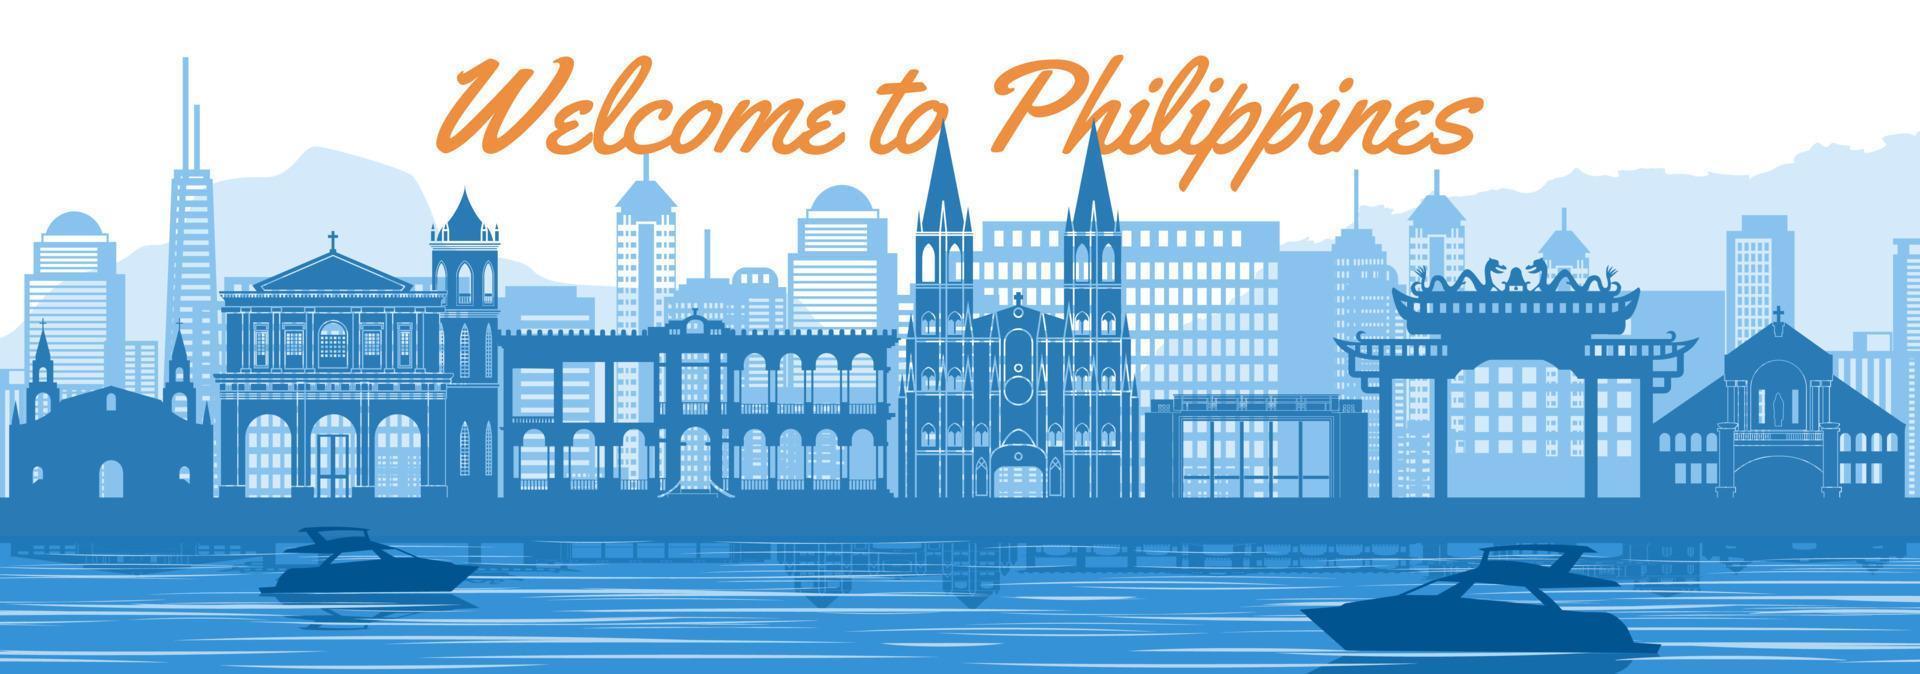 philippines famous landmark silhouette style behind river and boat and in front of towers vector